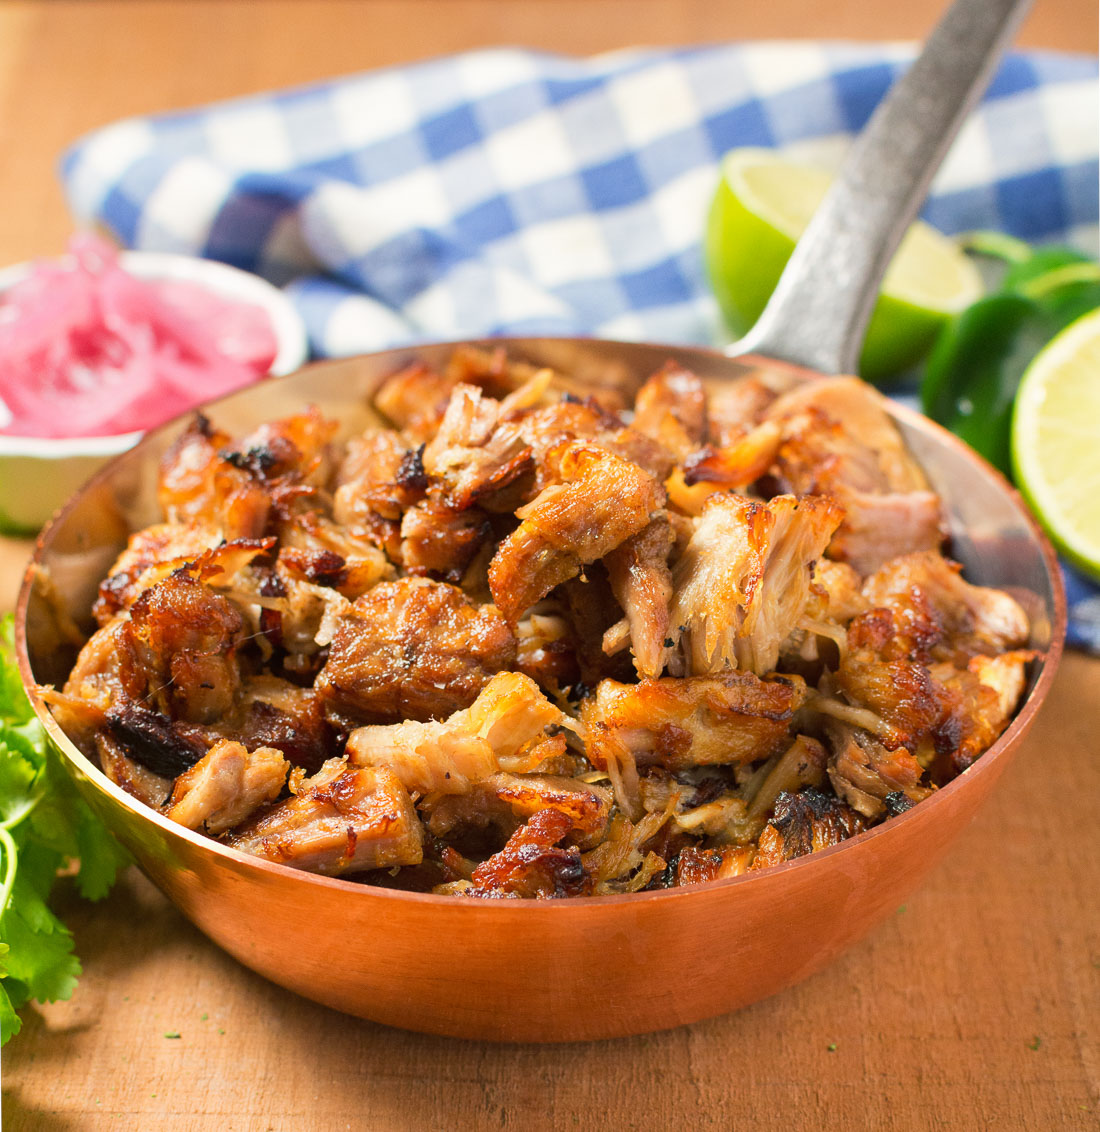 These crispy pork carnitas are as close as you are going to get without a plane ticket to Mexico.